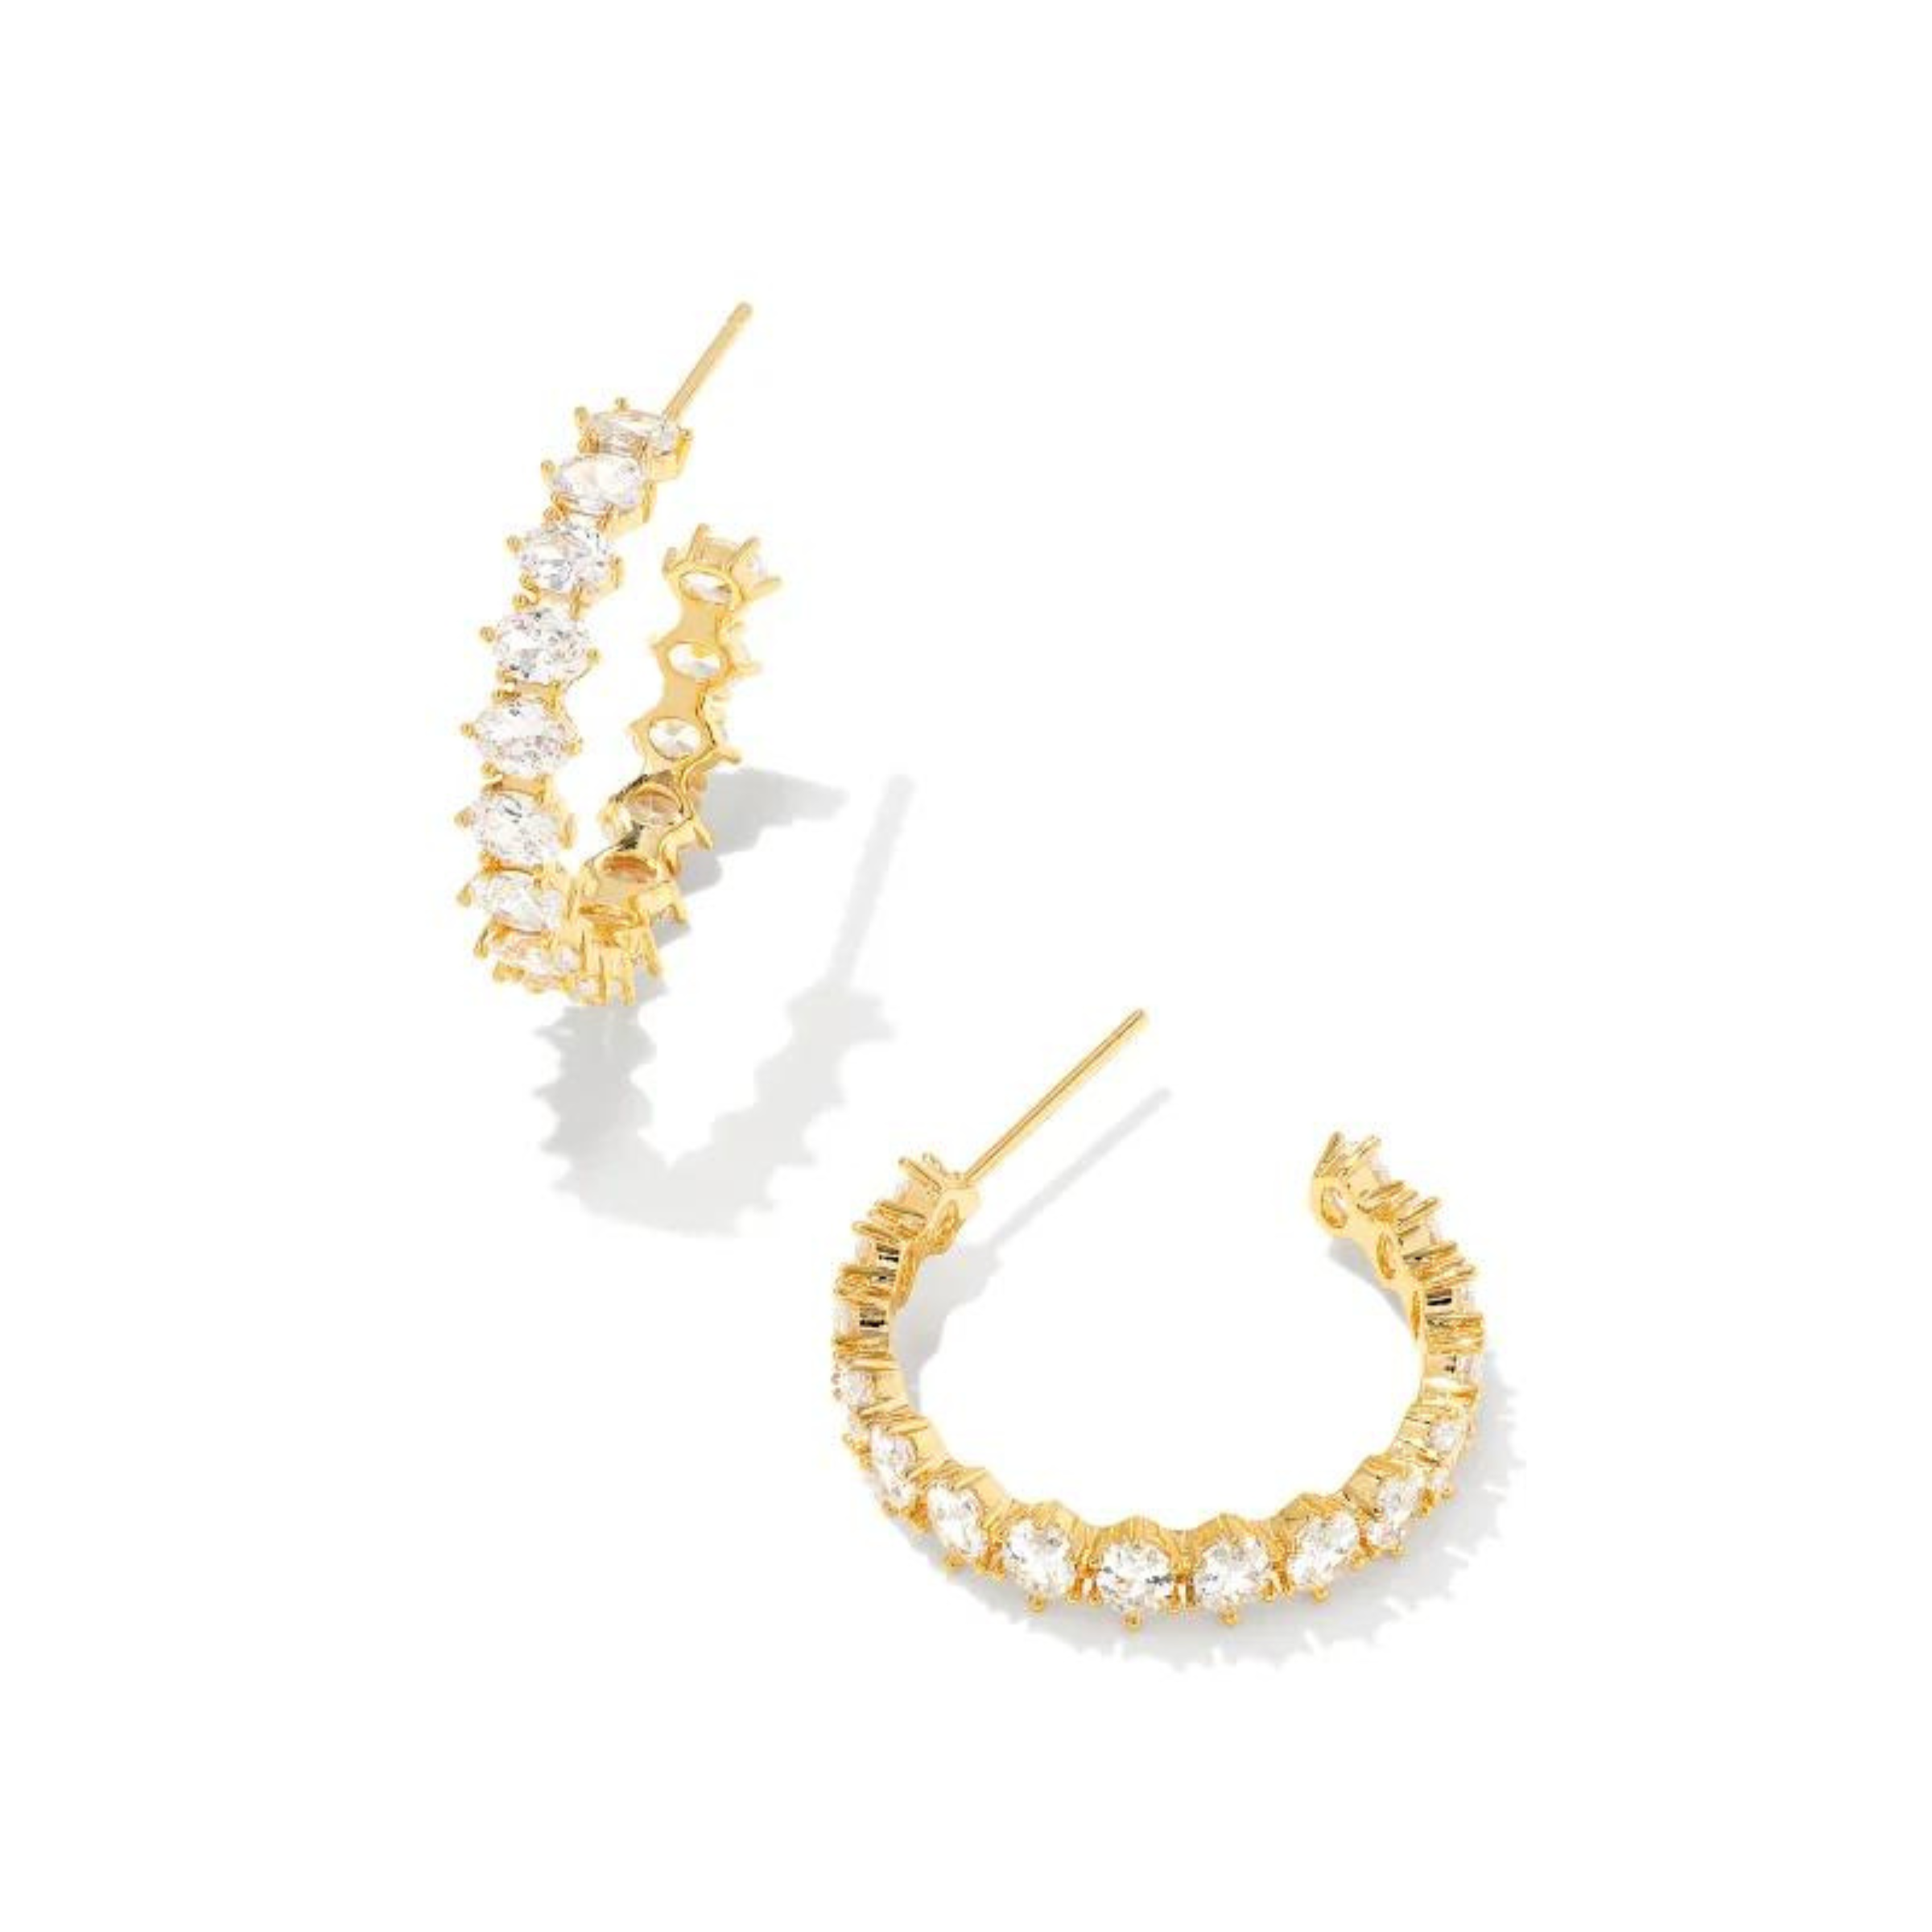 Pictured on a white background is a pair of gold hoop earrings with a oval, clear crystals. 